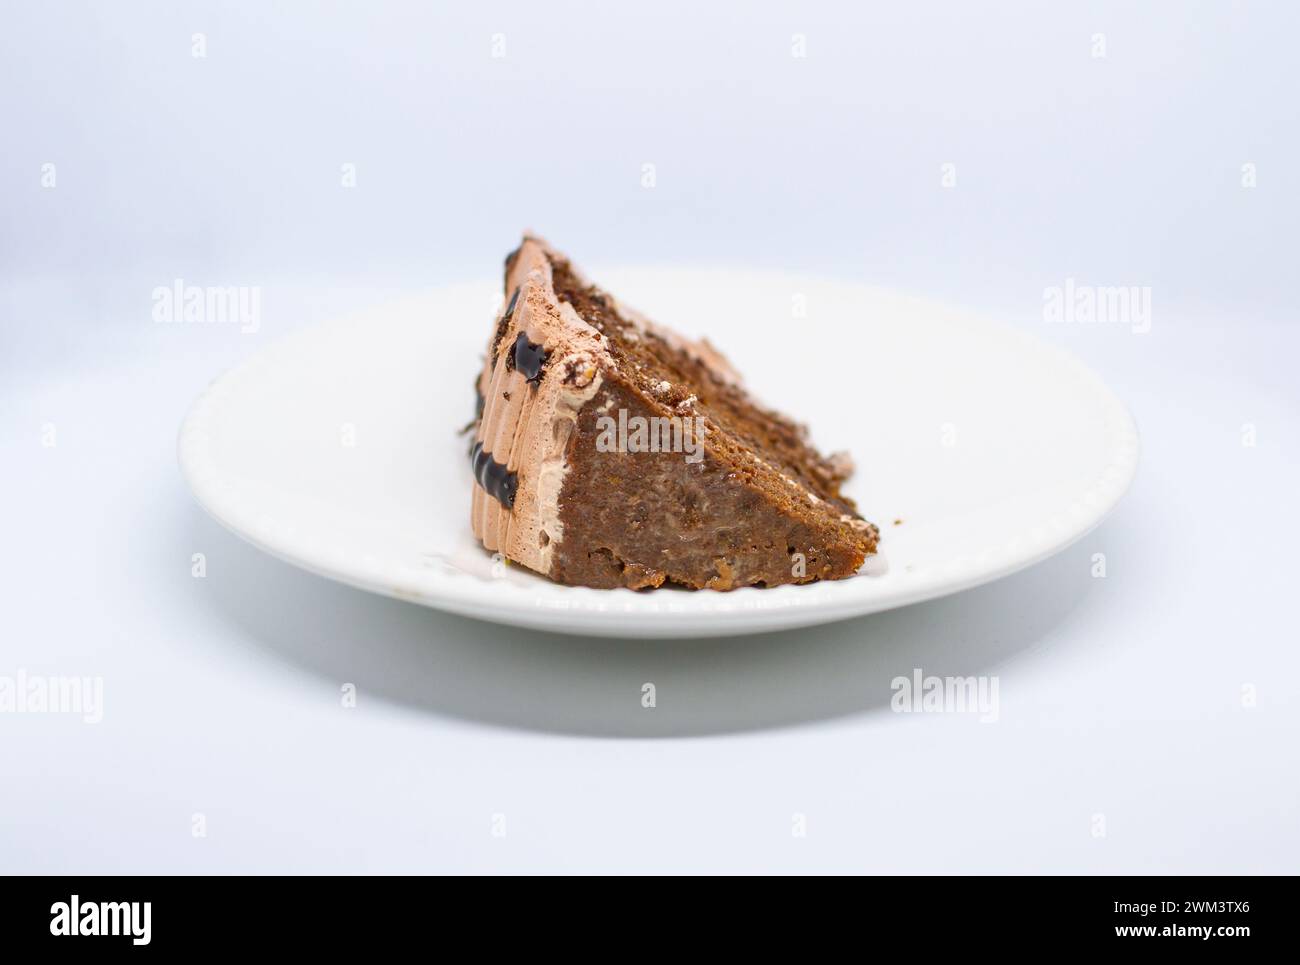 small piece of chocolate cake, delicious taste, brown color on a white background Stock Photo